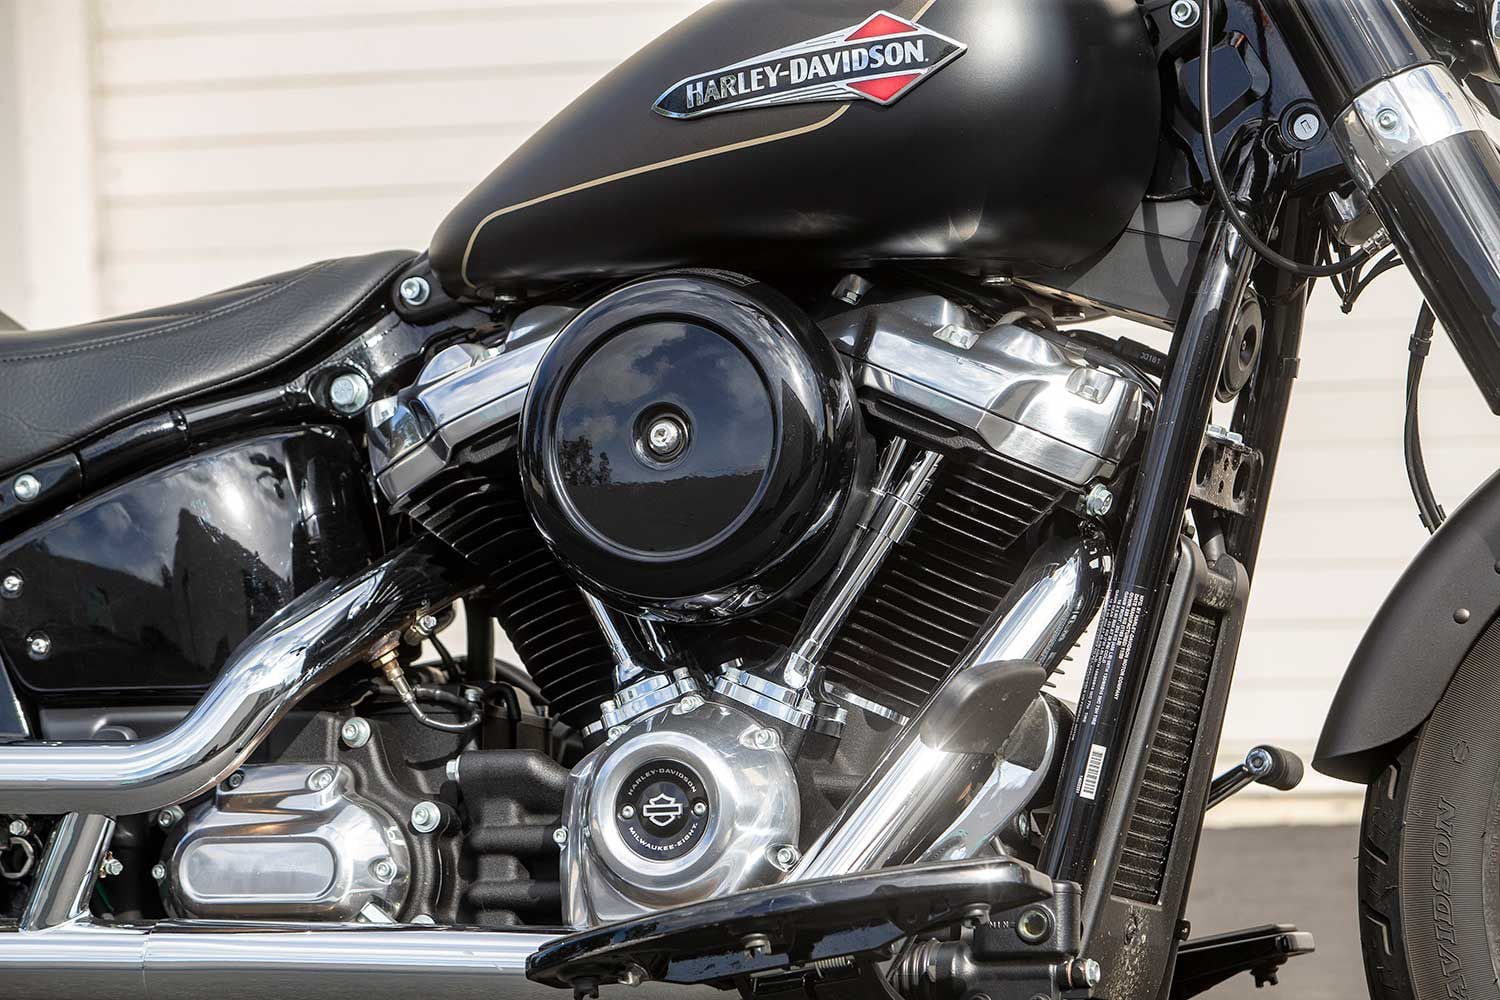 Harley-Davidson equipped the Softail Slim with the Big Twin Milwaukee-Eight 107 engine, which is worthy of 73.7 hp and 98.4 pound-feet of torque on the <em>Motorcyclist</em> dyno.